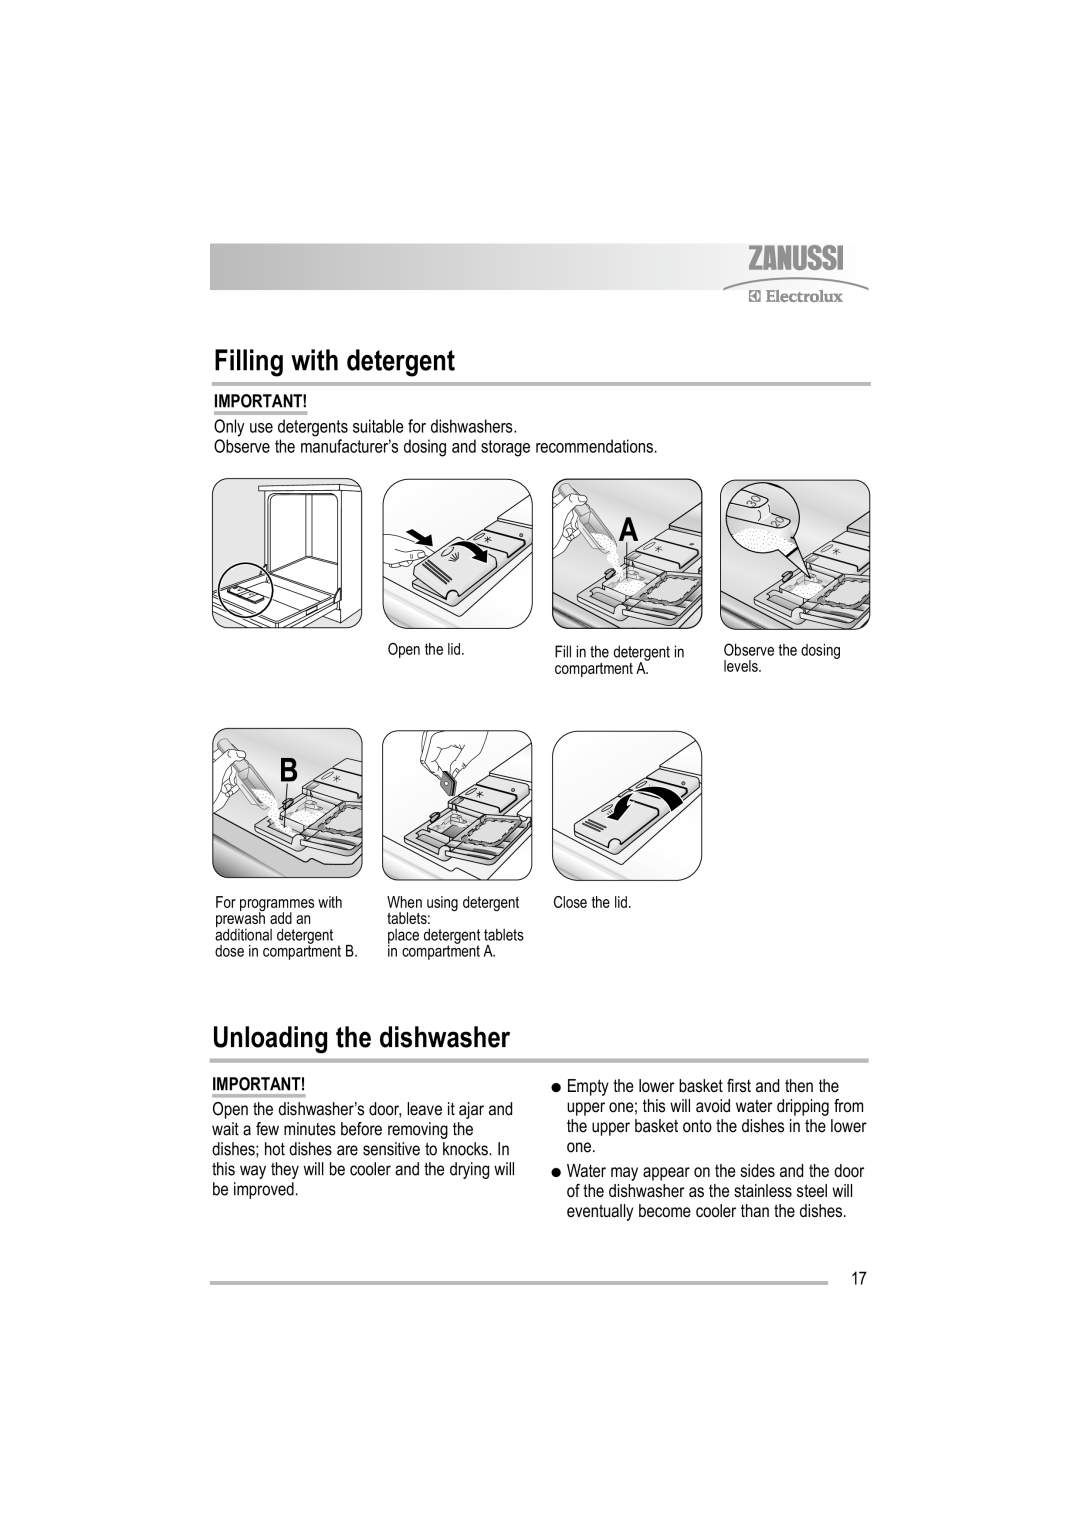 Electrolux ZDF 501 user manual Filling with detergent, Unloading the dishwasher 